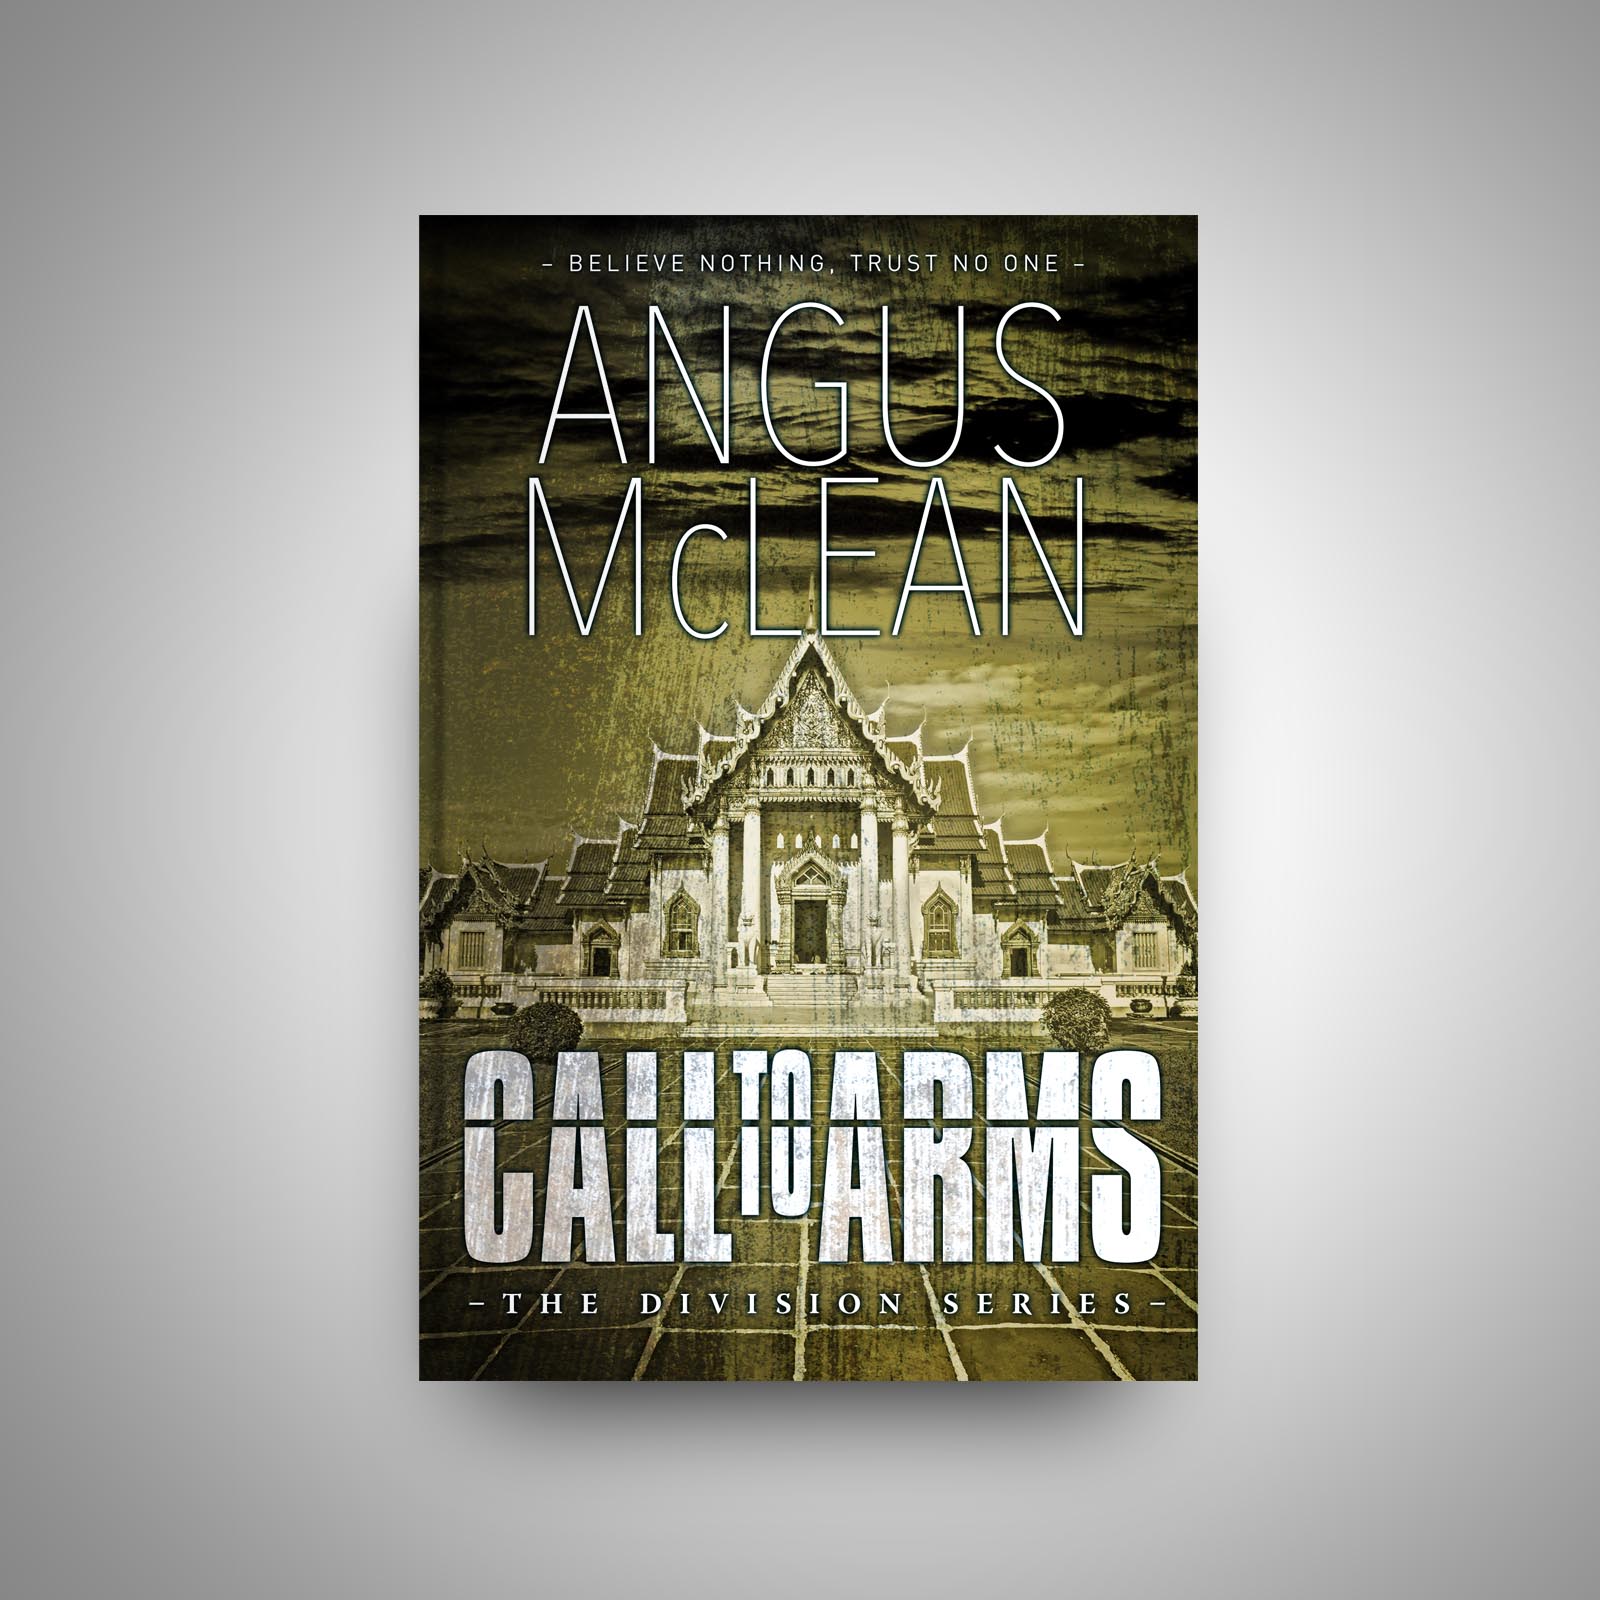 Angus McLean ebook download kindle The Division Call to Arms